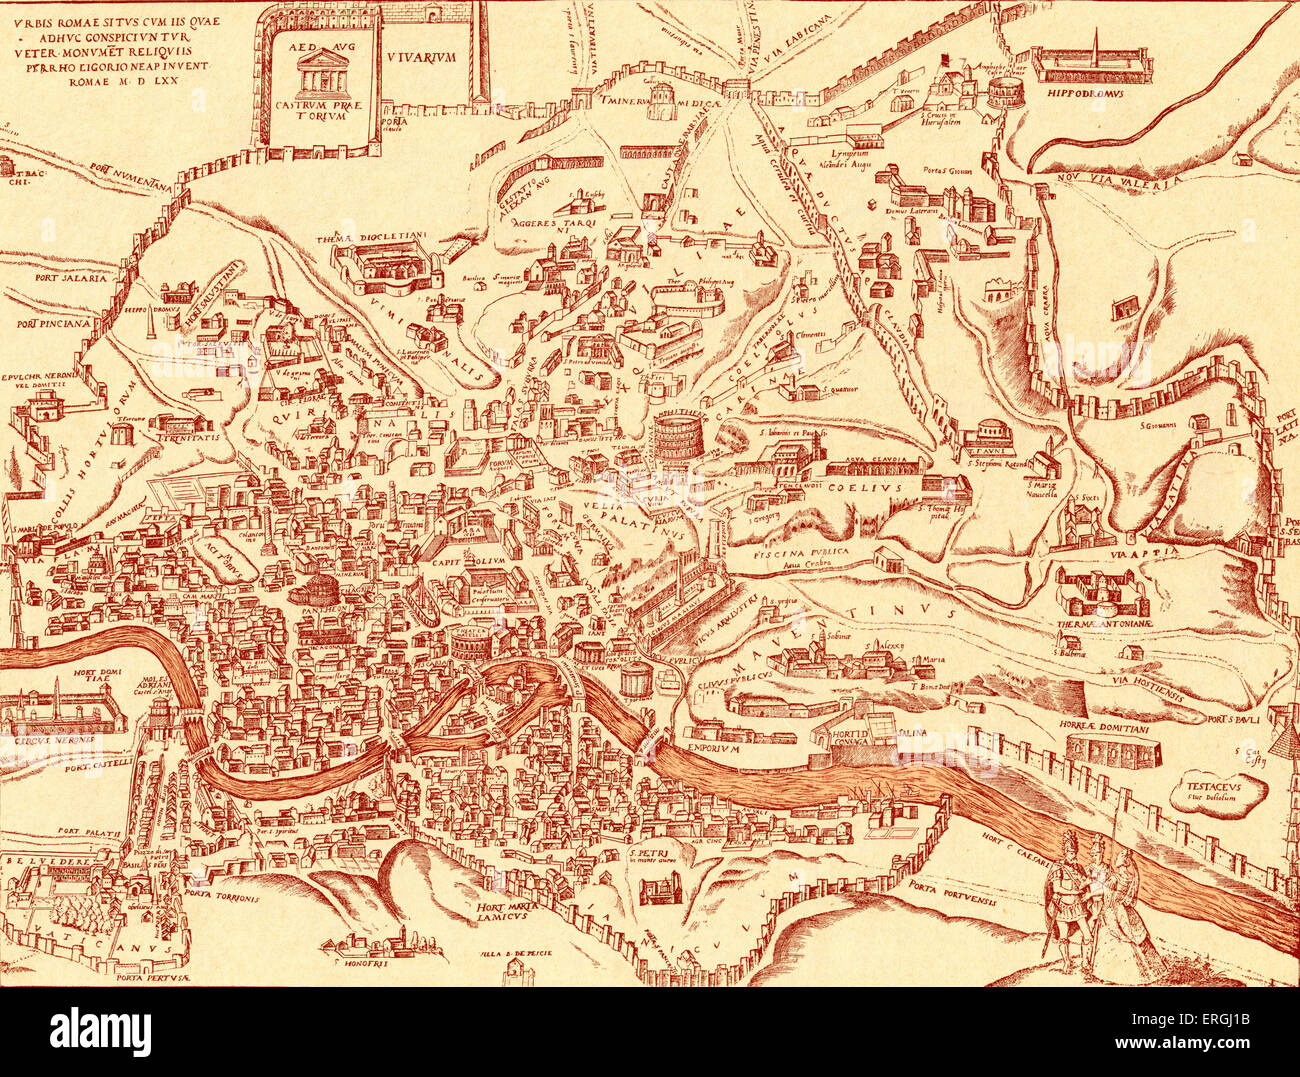 Map of City of Rome and its ancient monuments - in 'Civitas Oreis ...